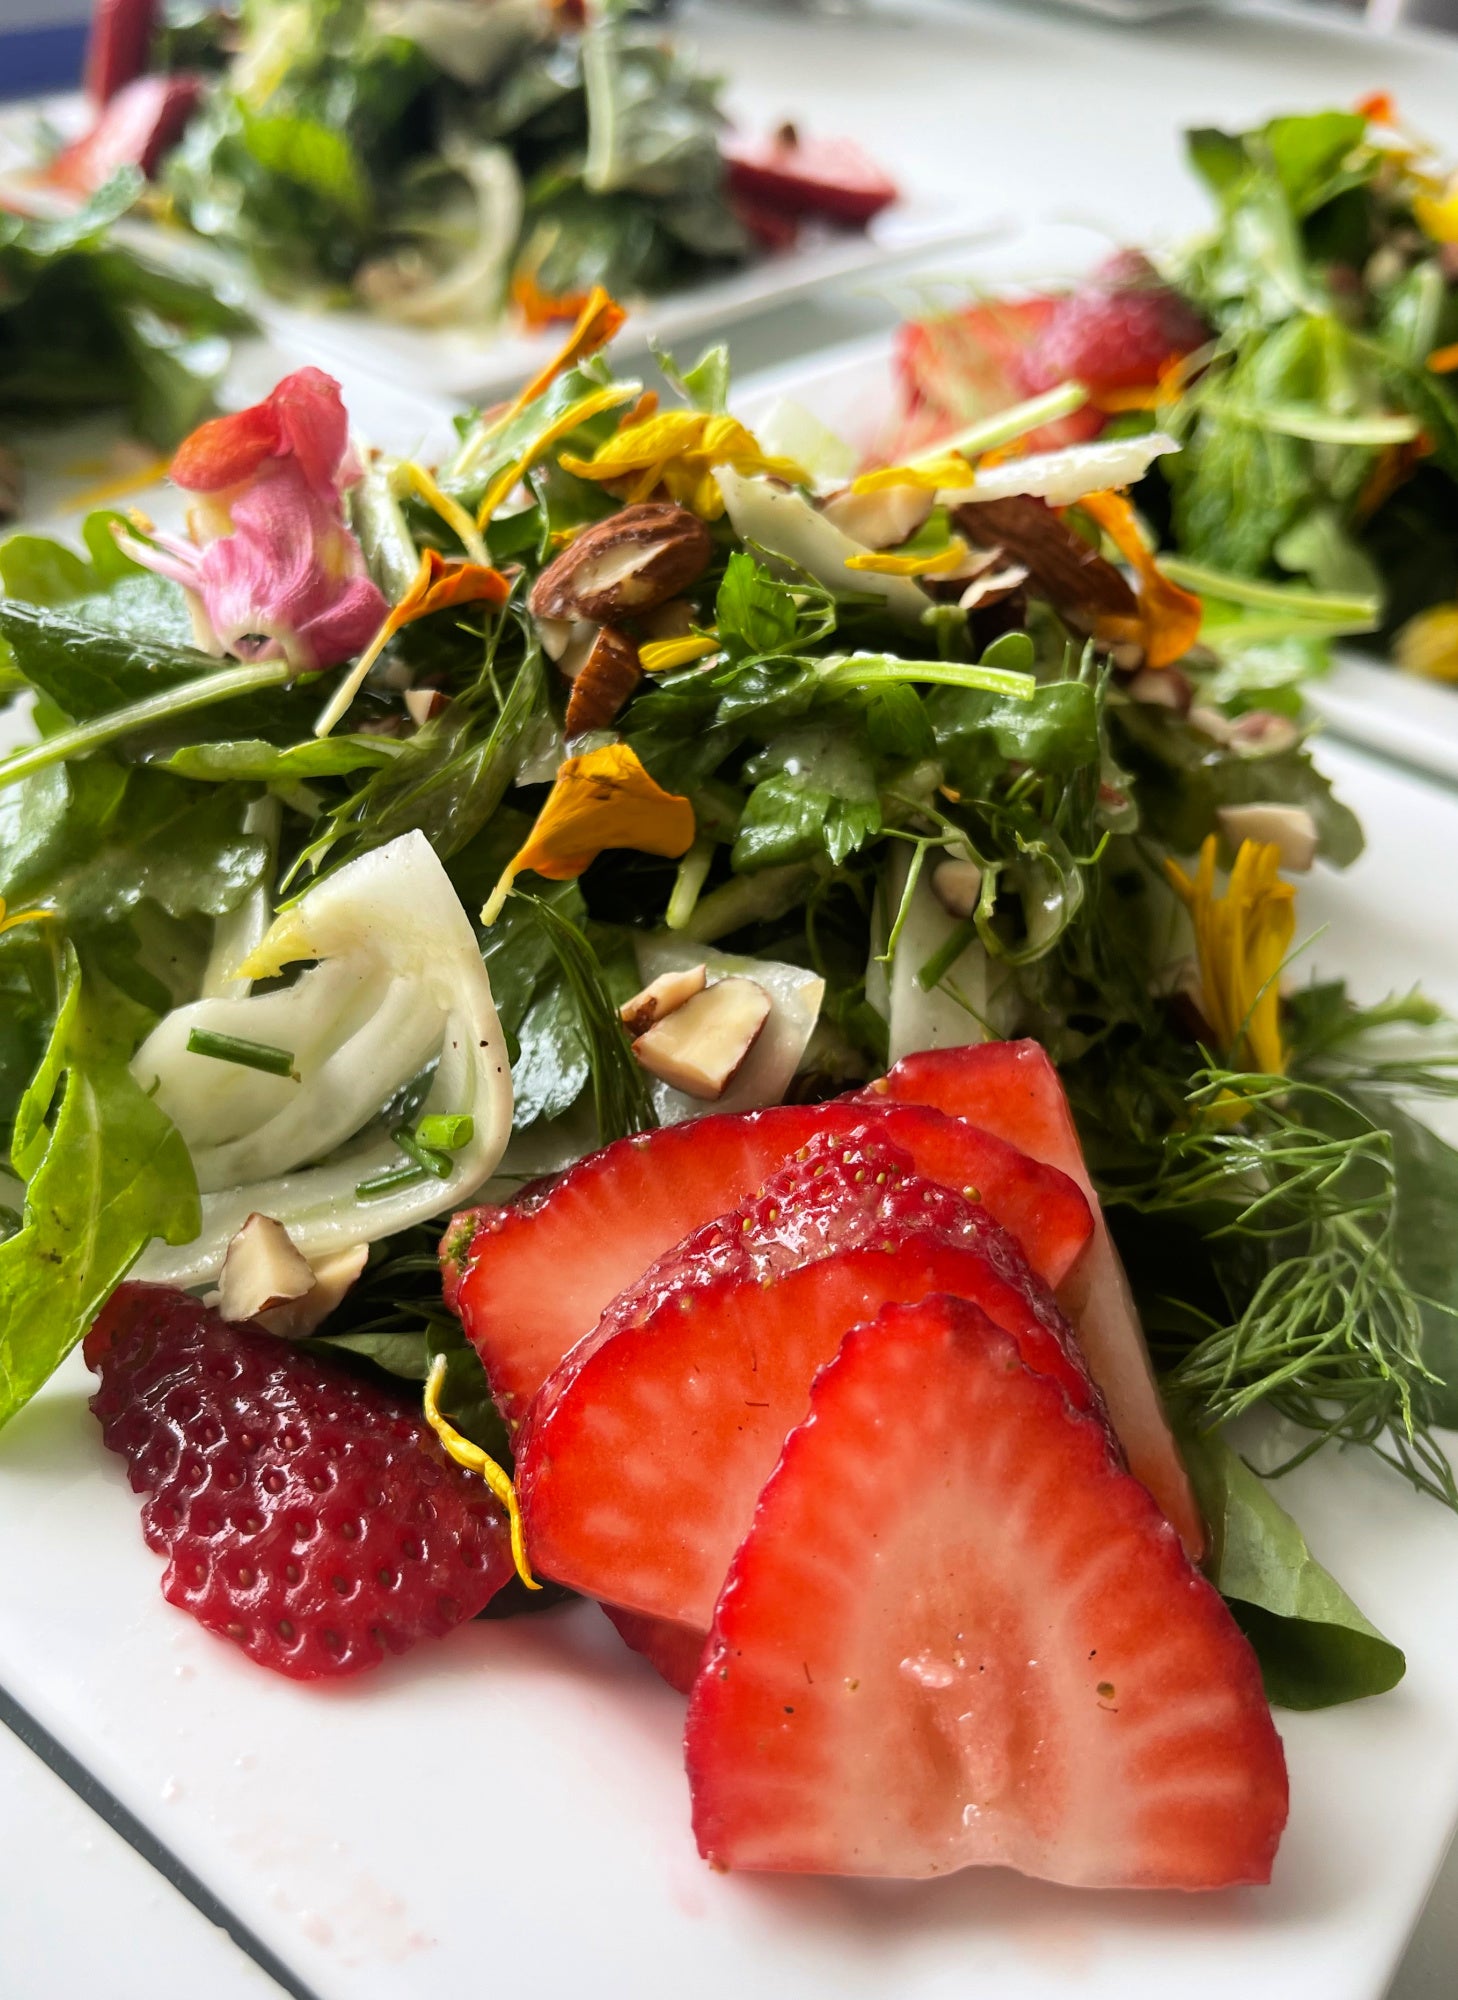 Shef Madres Catering uses farm fresh ingredients, fresh strawberry salad.